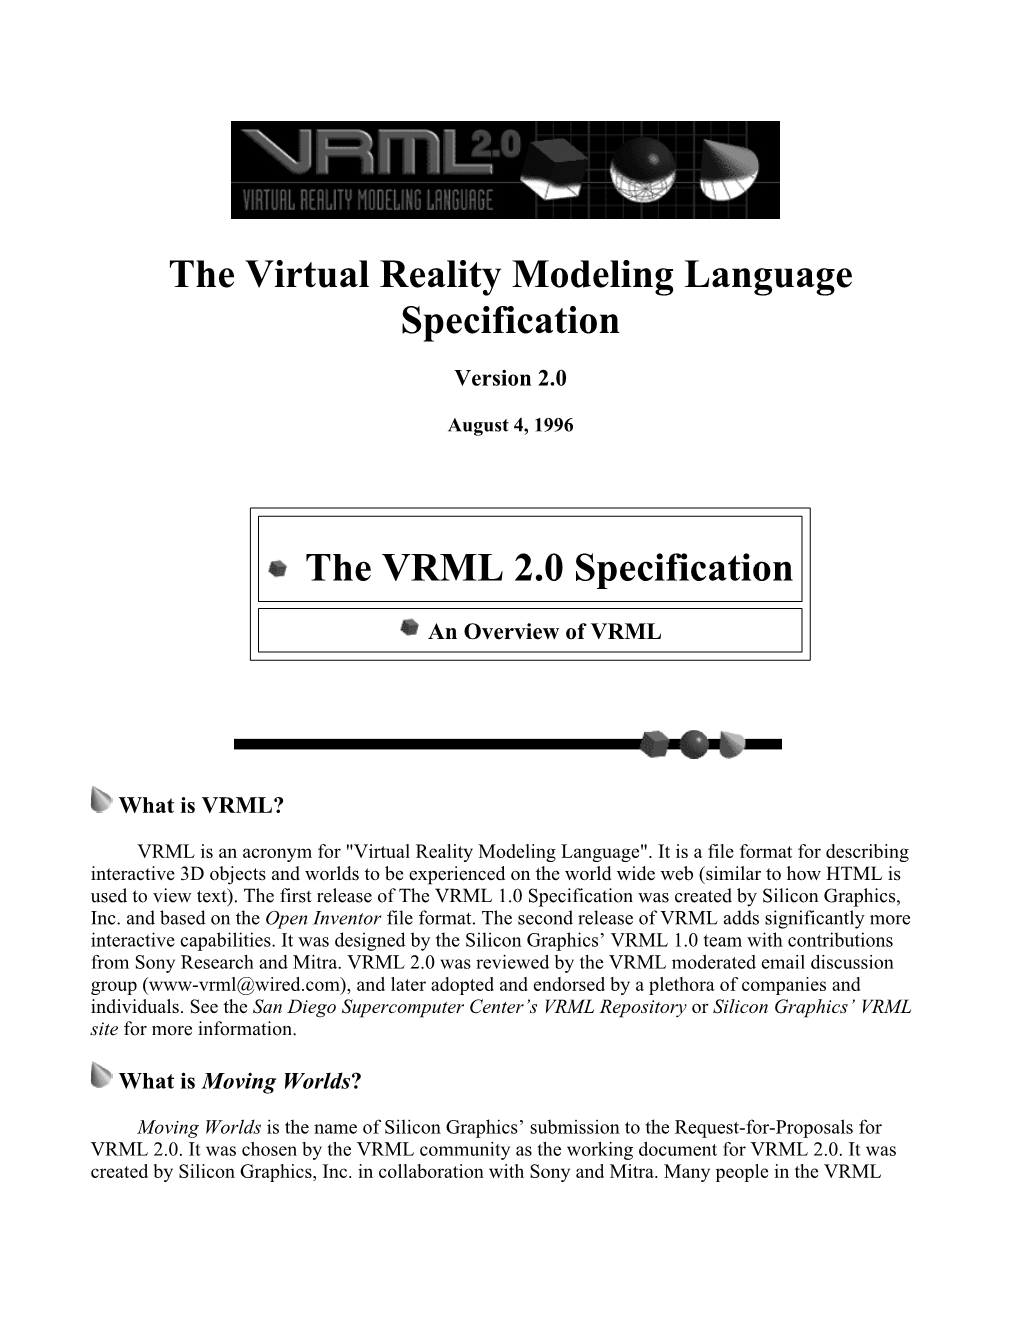 The Virtual Reality Modeling Language Specification the VRML